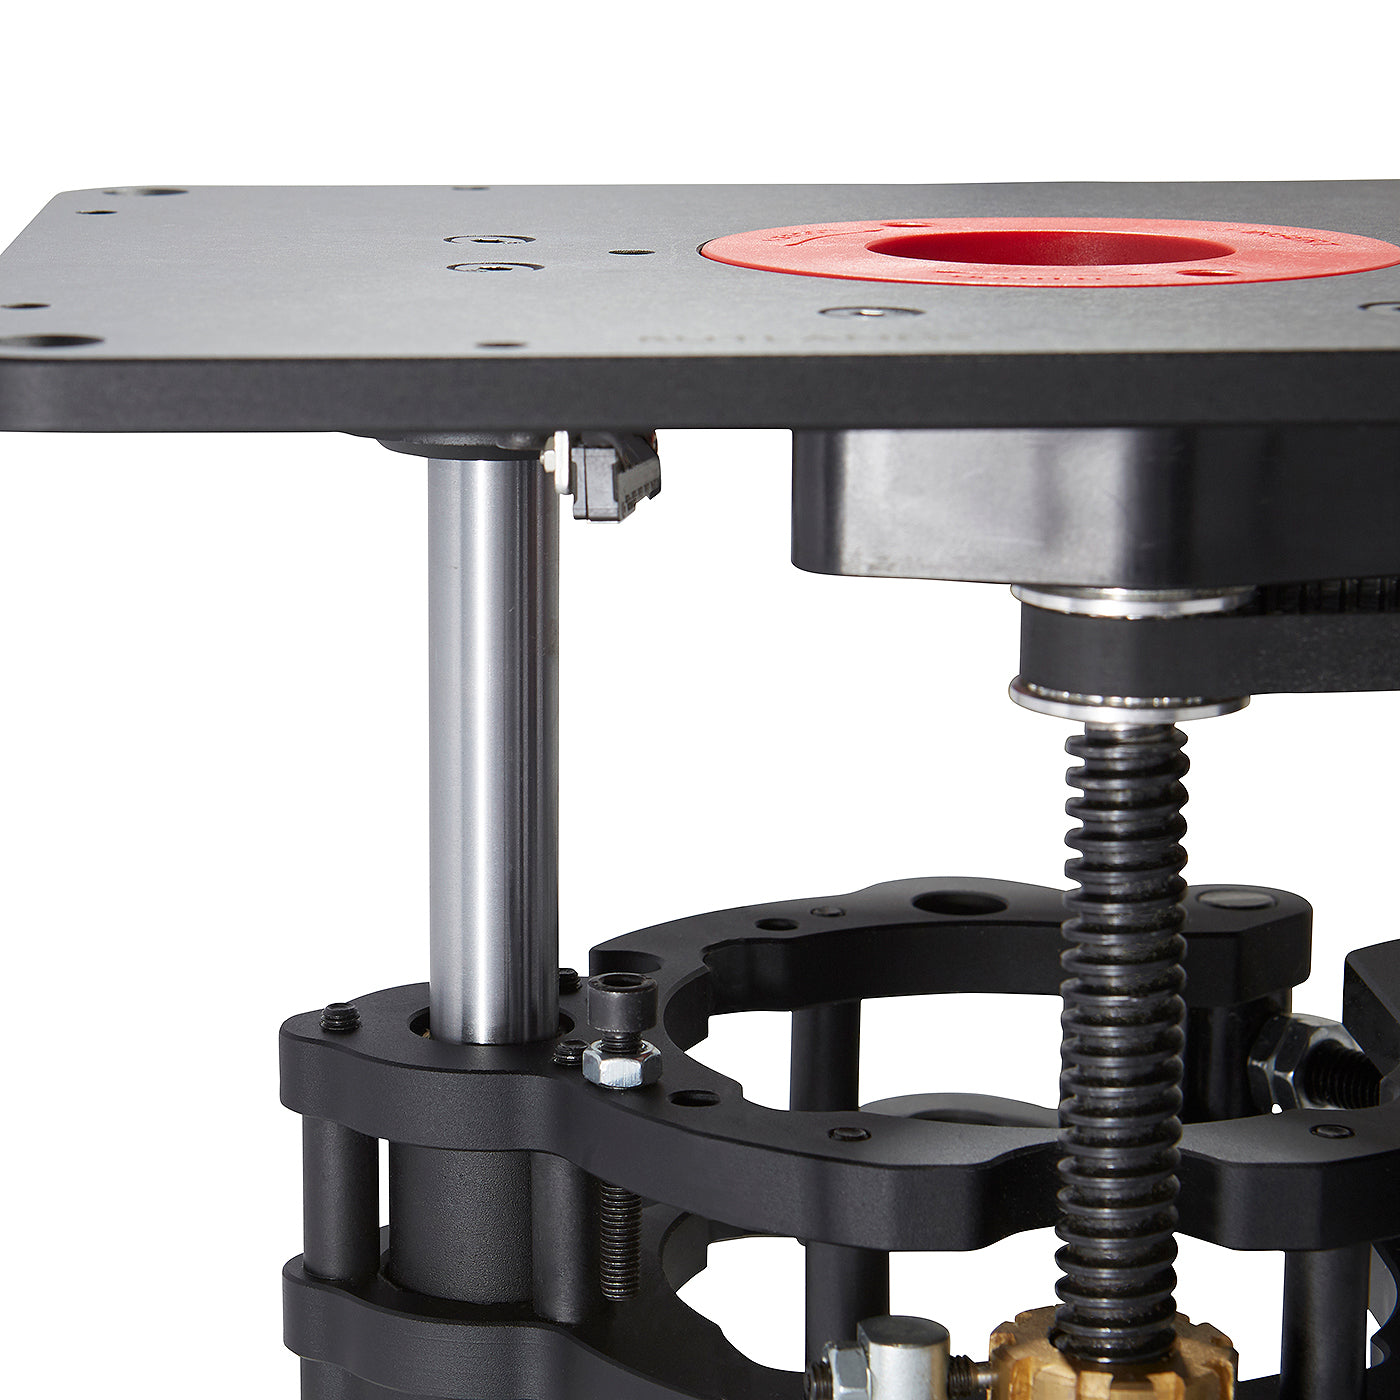 Cast Router Table GTS - R20 Electronic Lift and Motor